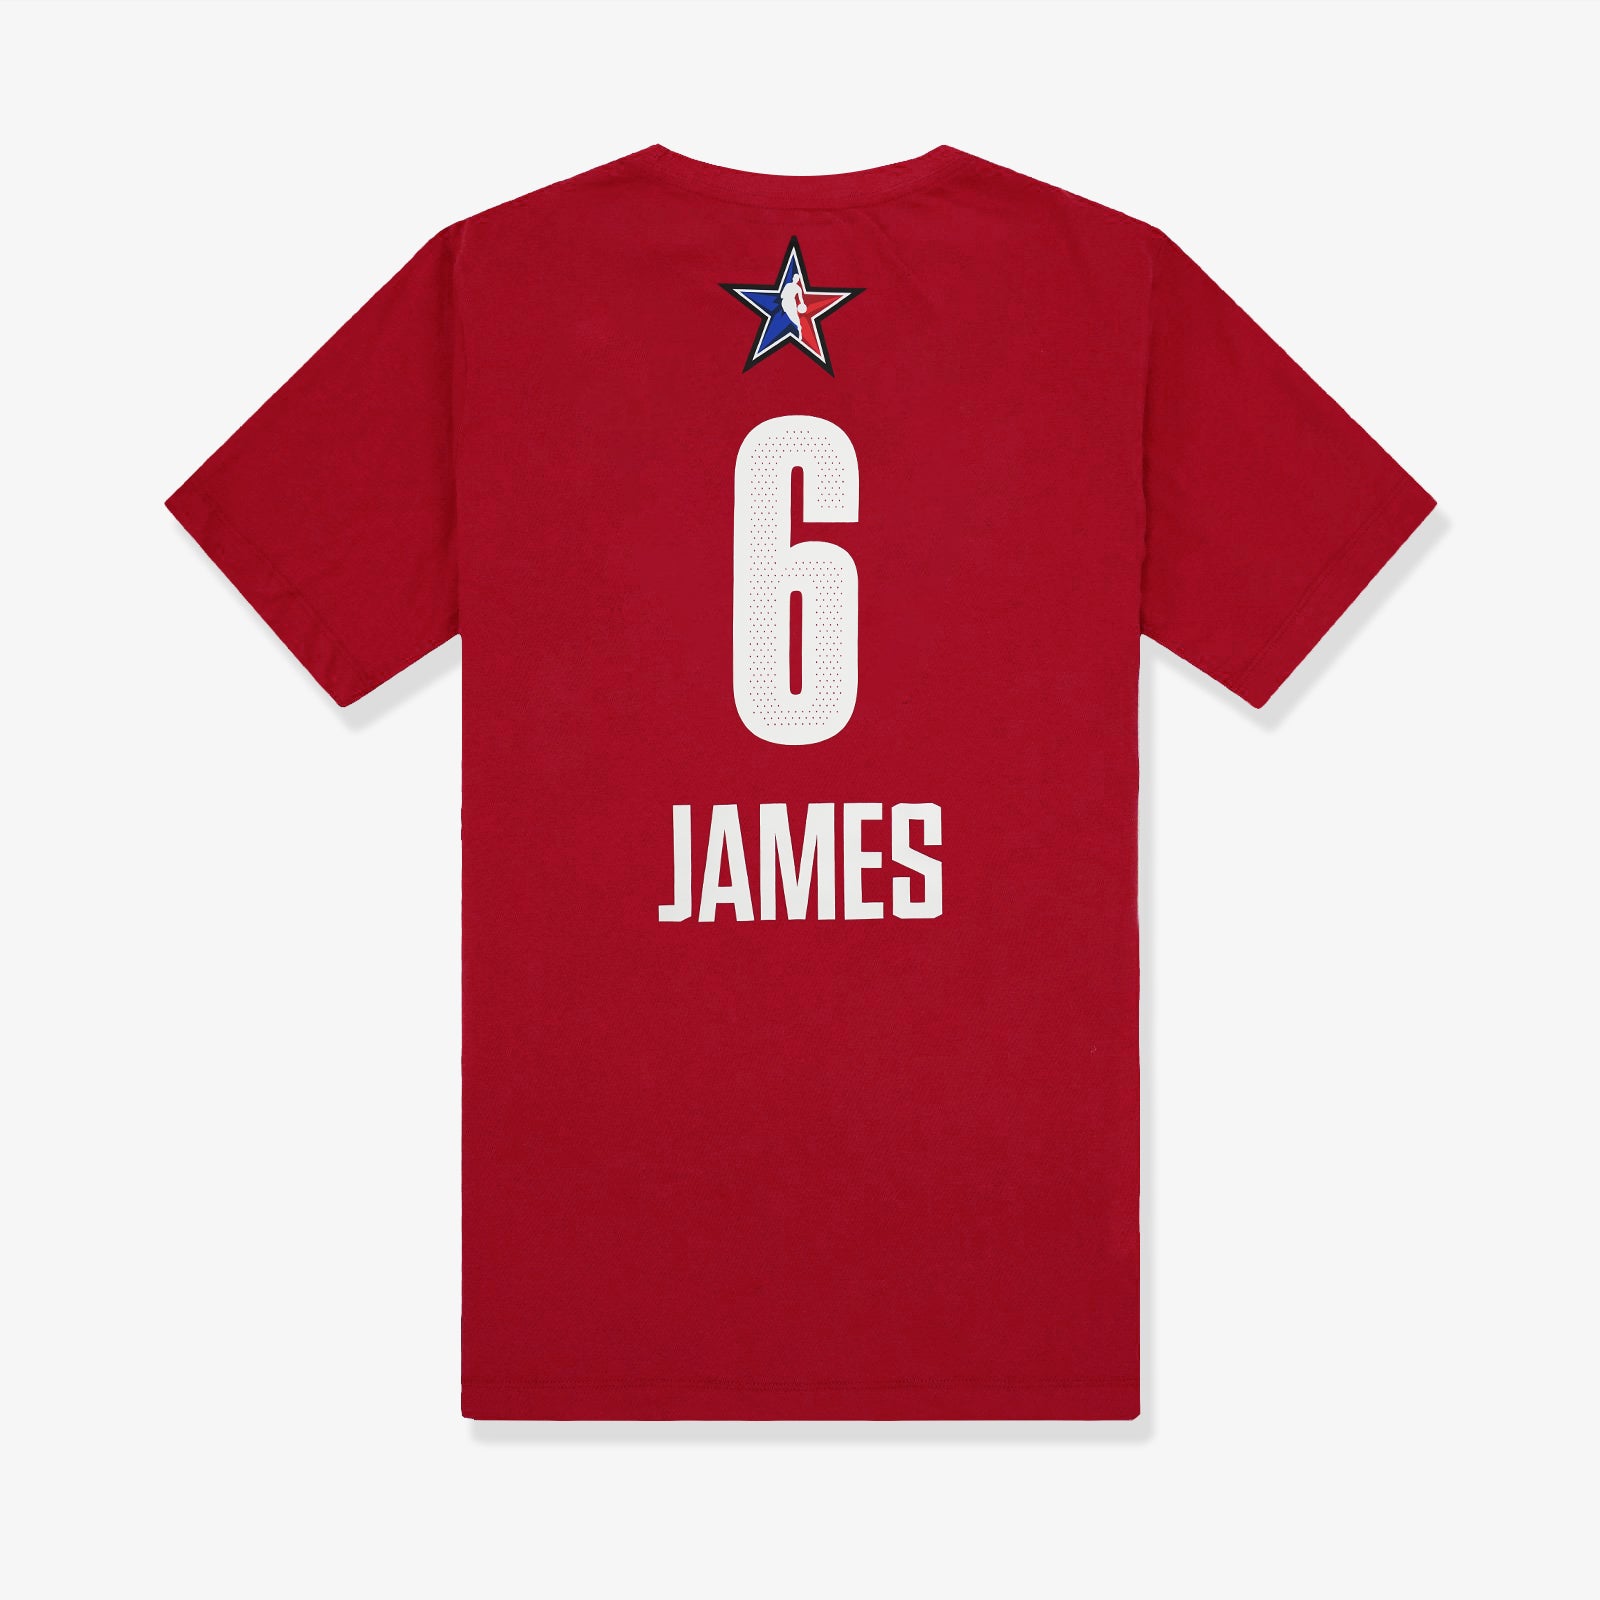 LeBron James All-Star Game NBA Jerseys for sale